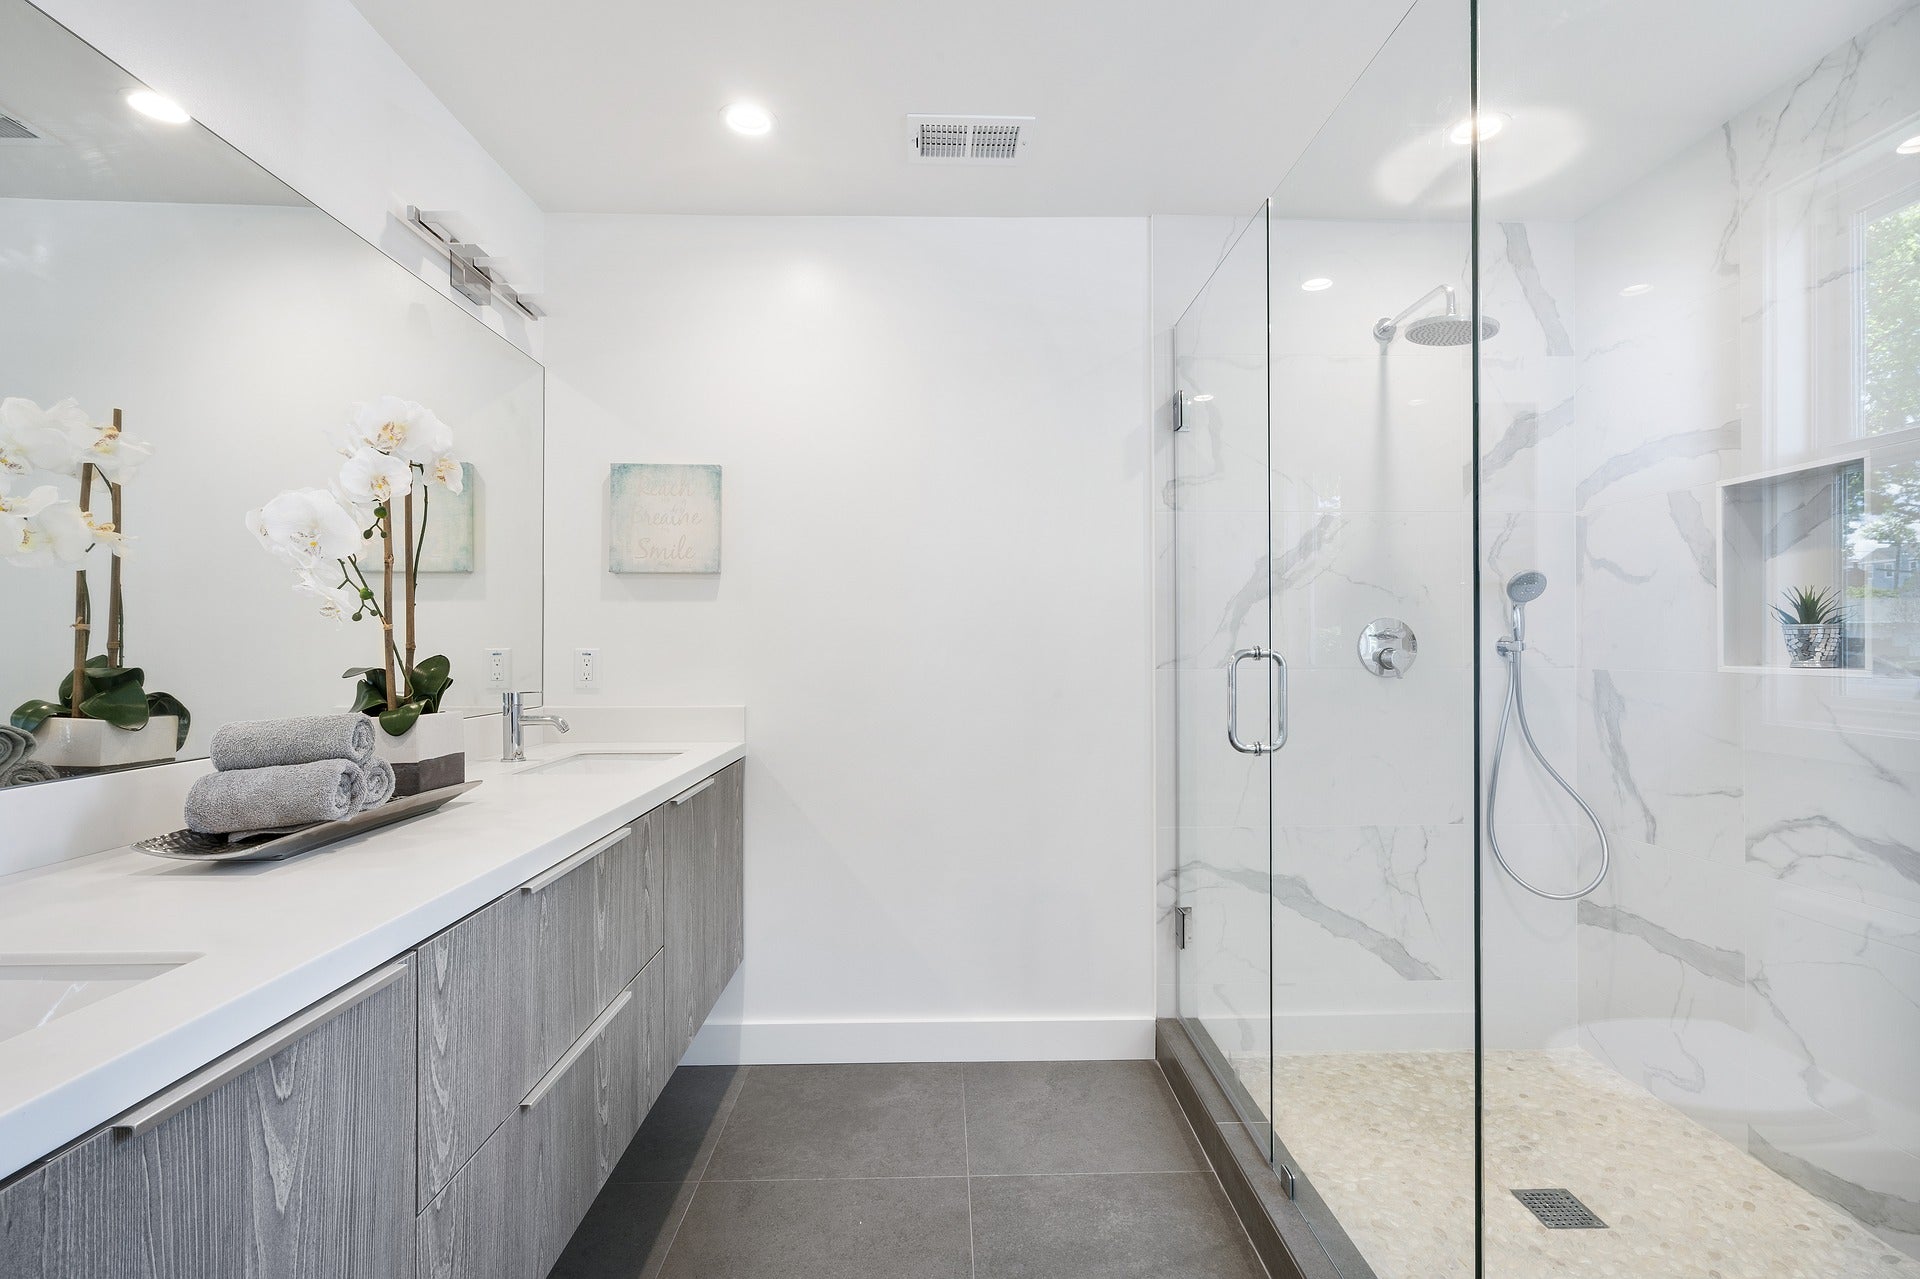 Tips to Consider Before a Bathroom Remodel